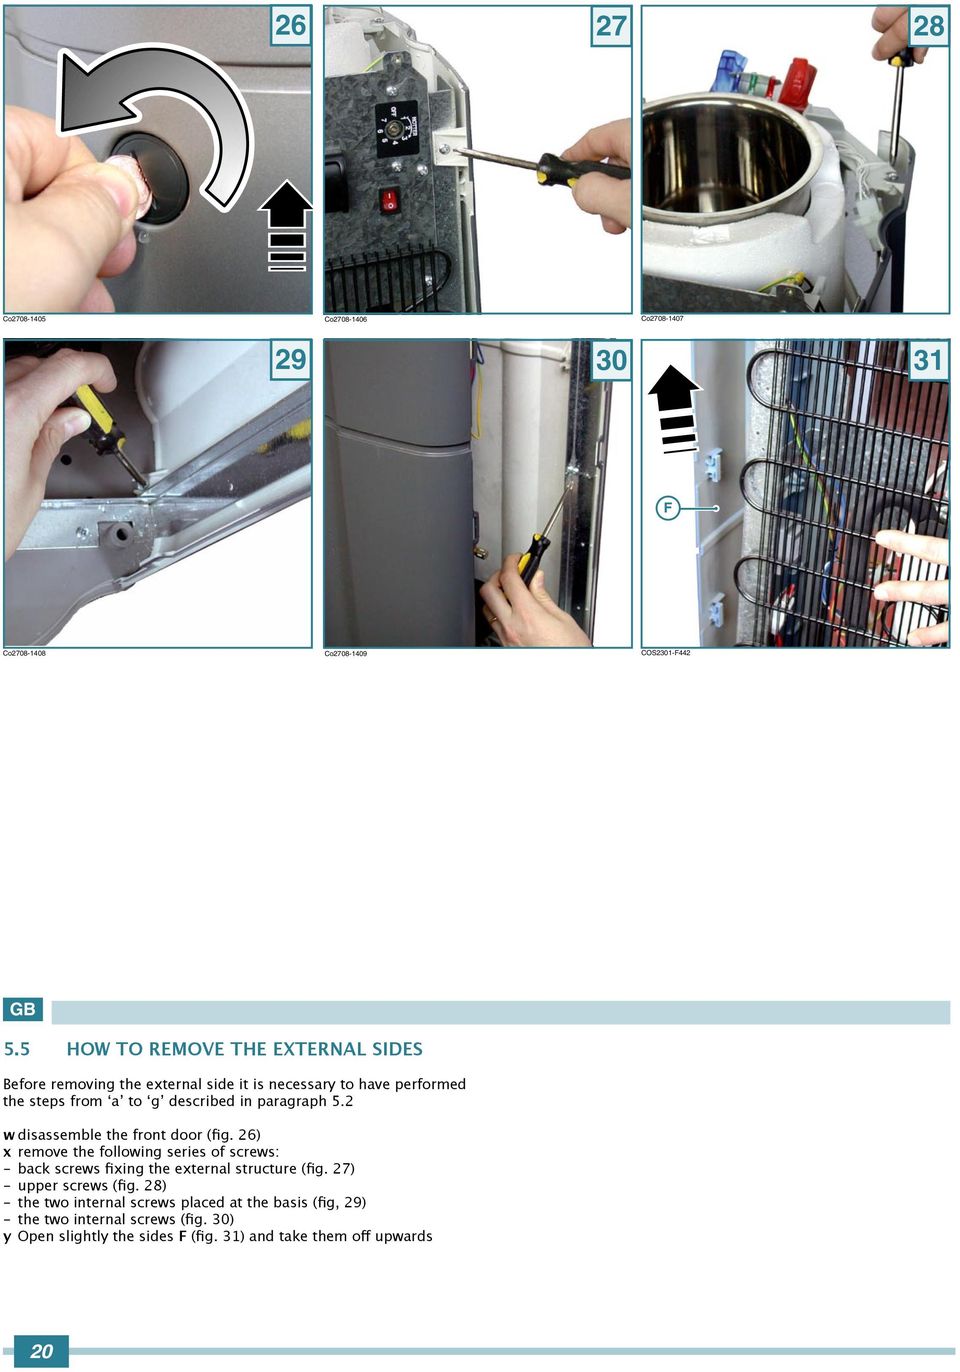 paragraph 5.2 w disassemble the front door (fig. 26) remove the following series of screws: - back screws fiing the eternal structure (fig.